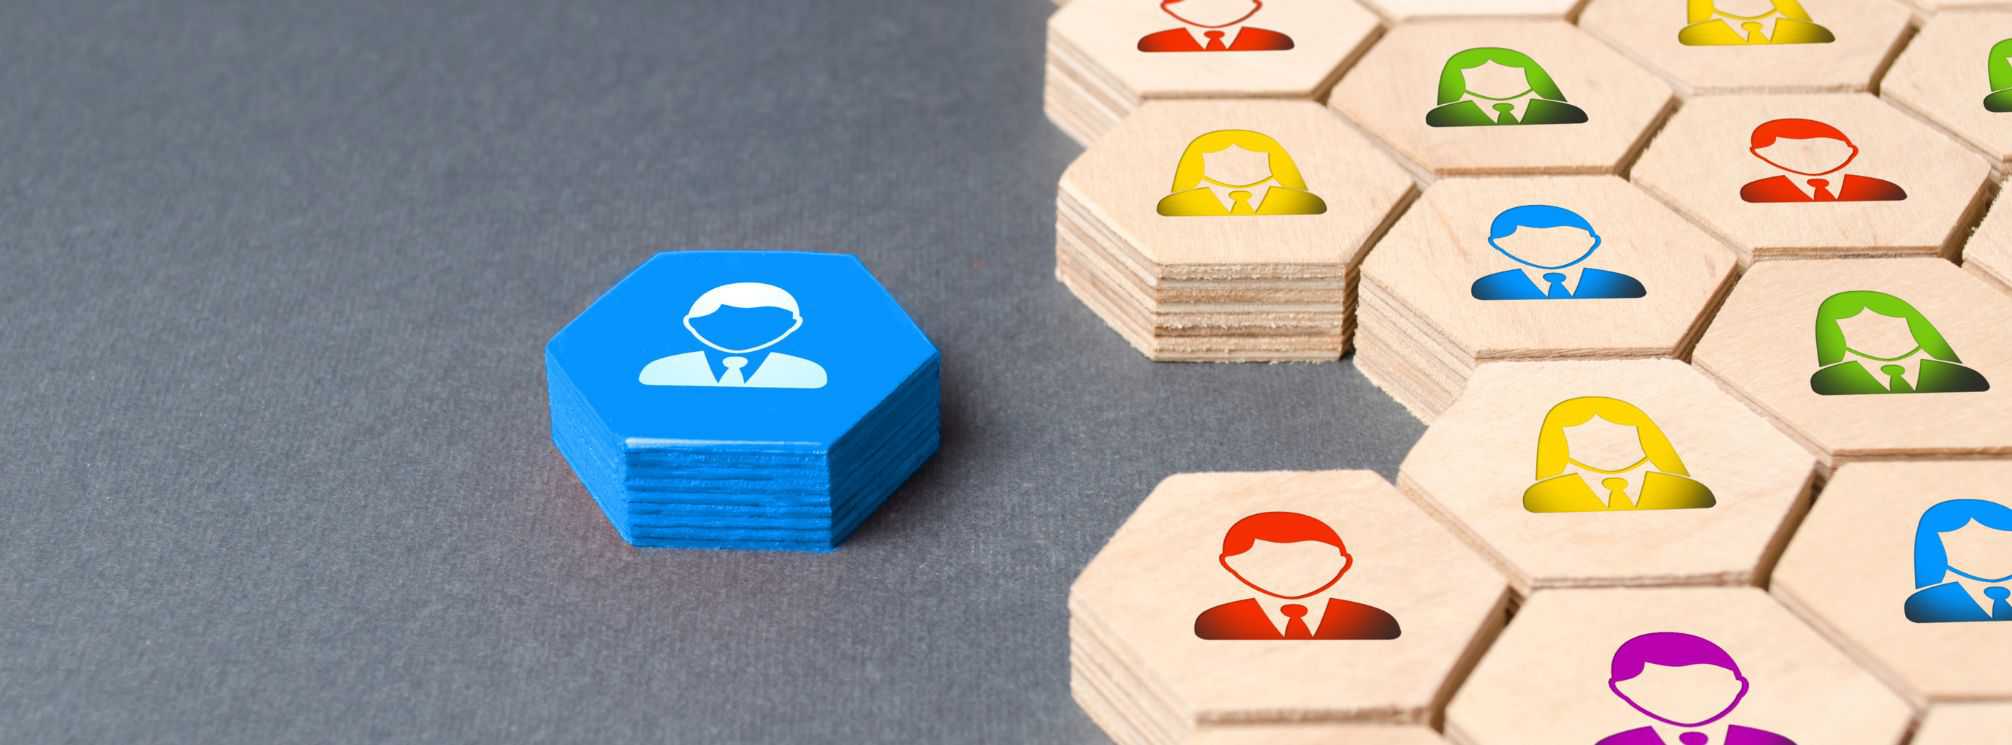 manager icon on a blue wooden block next to a matrix of multicolor people icons on wood blocks